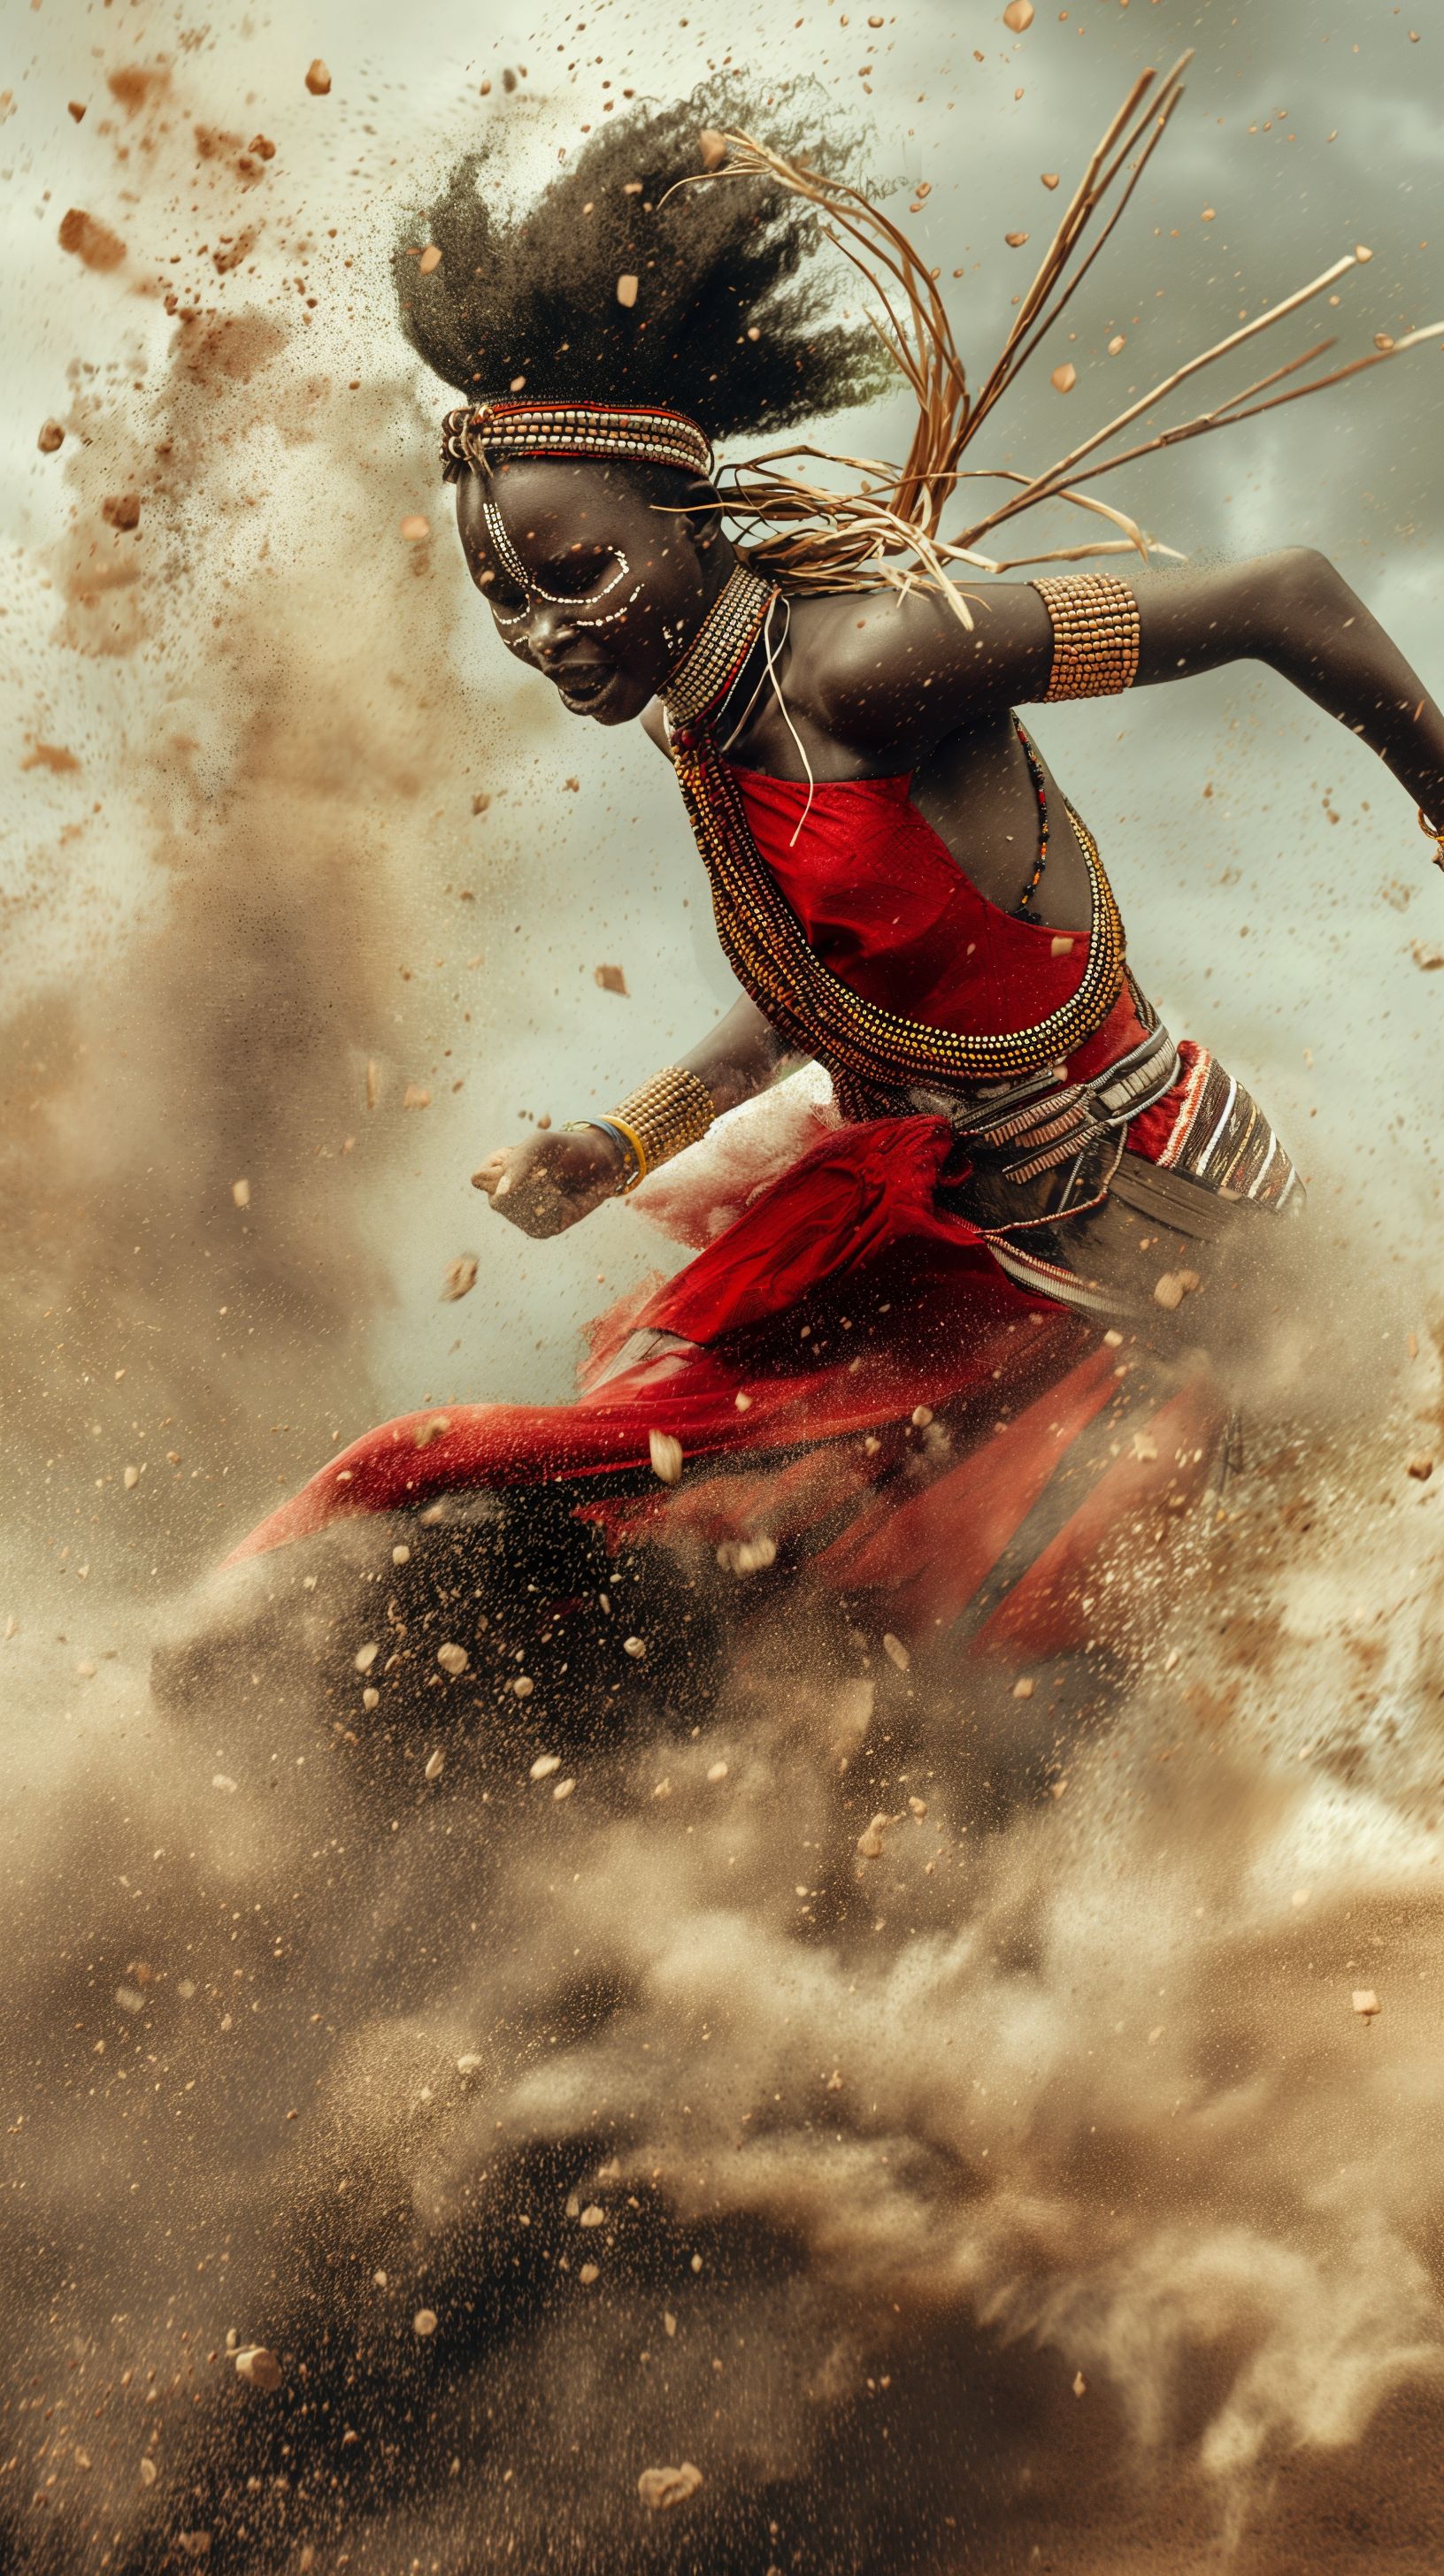 Prompt: attractive dark skin warrior women, tribe from africa, red cloth clothing with beads, peircing eyes, national geographic cover, joyful and dancing with reeds on there ankles, making a cloud of dust around them as they stamp hard on the ground --ar 9:16 --v 6.0